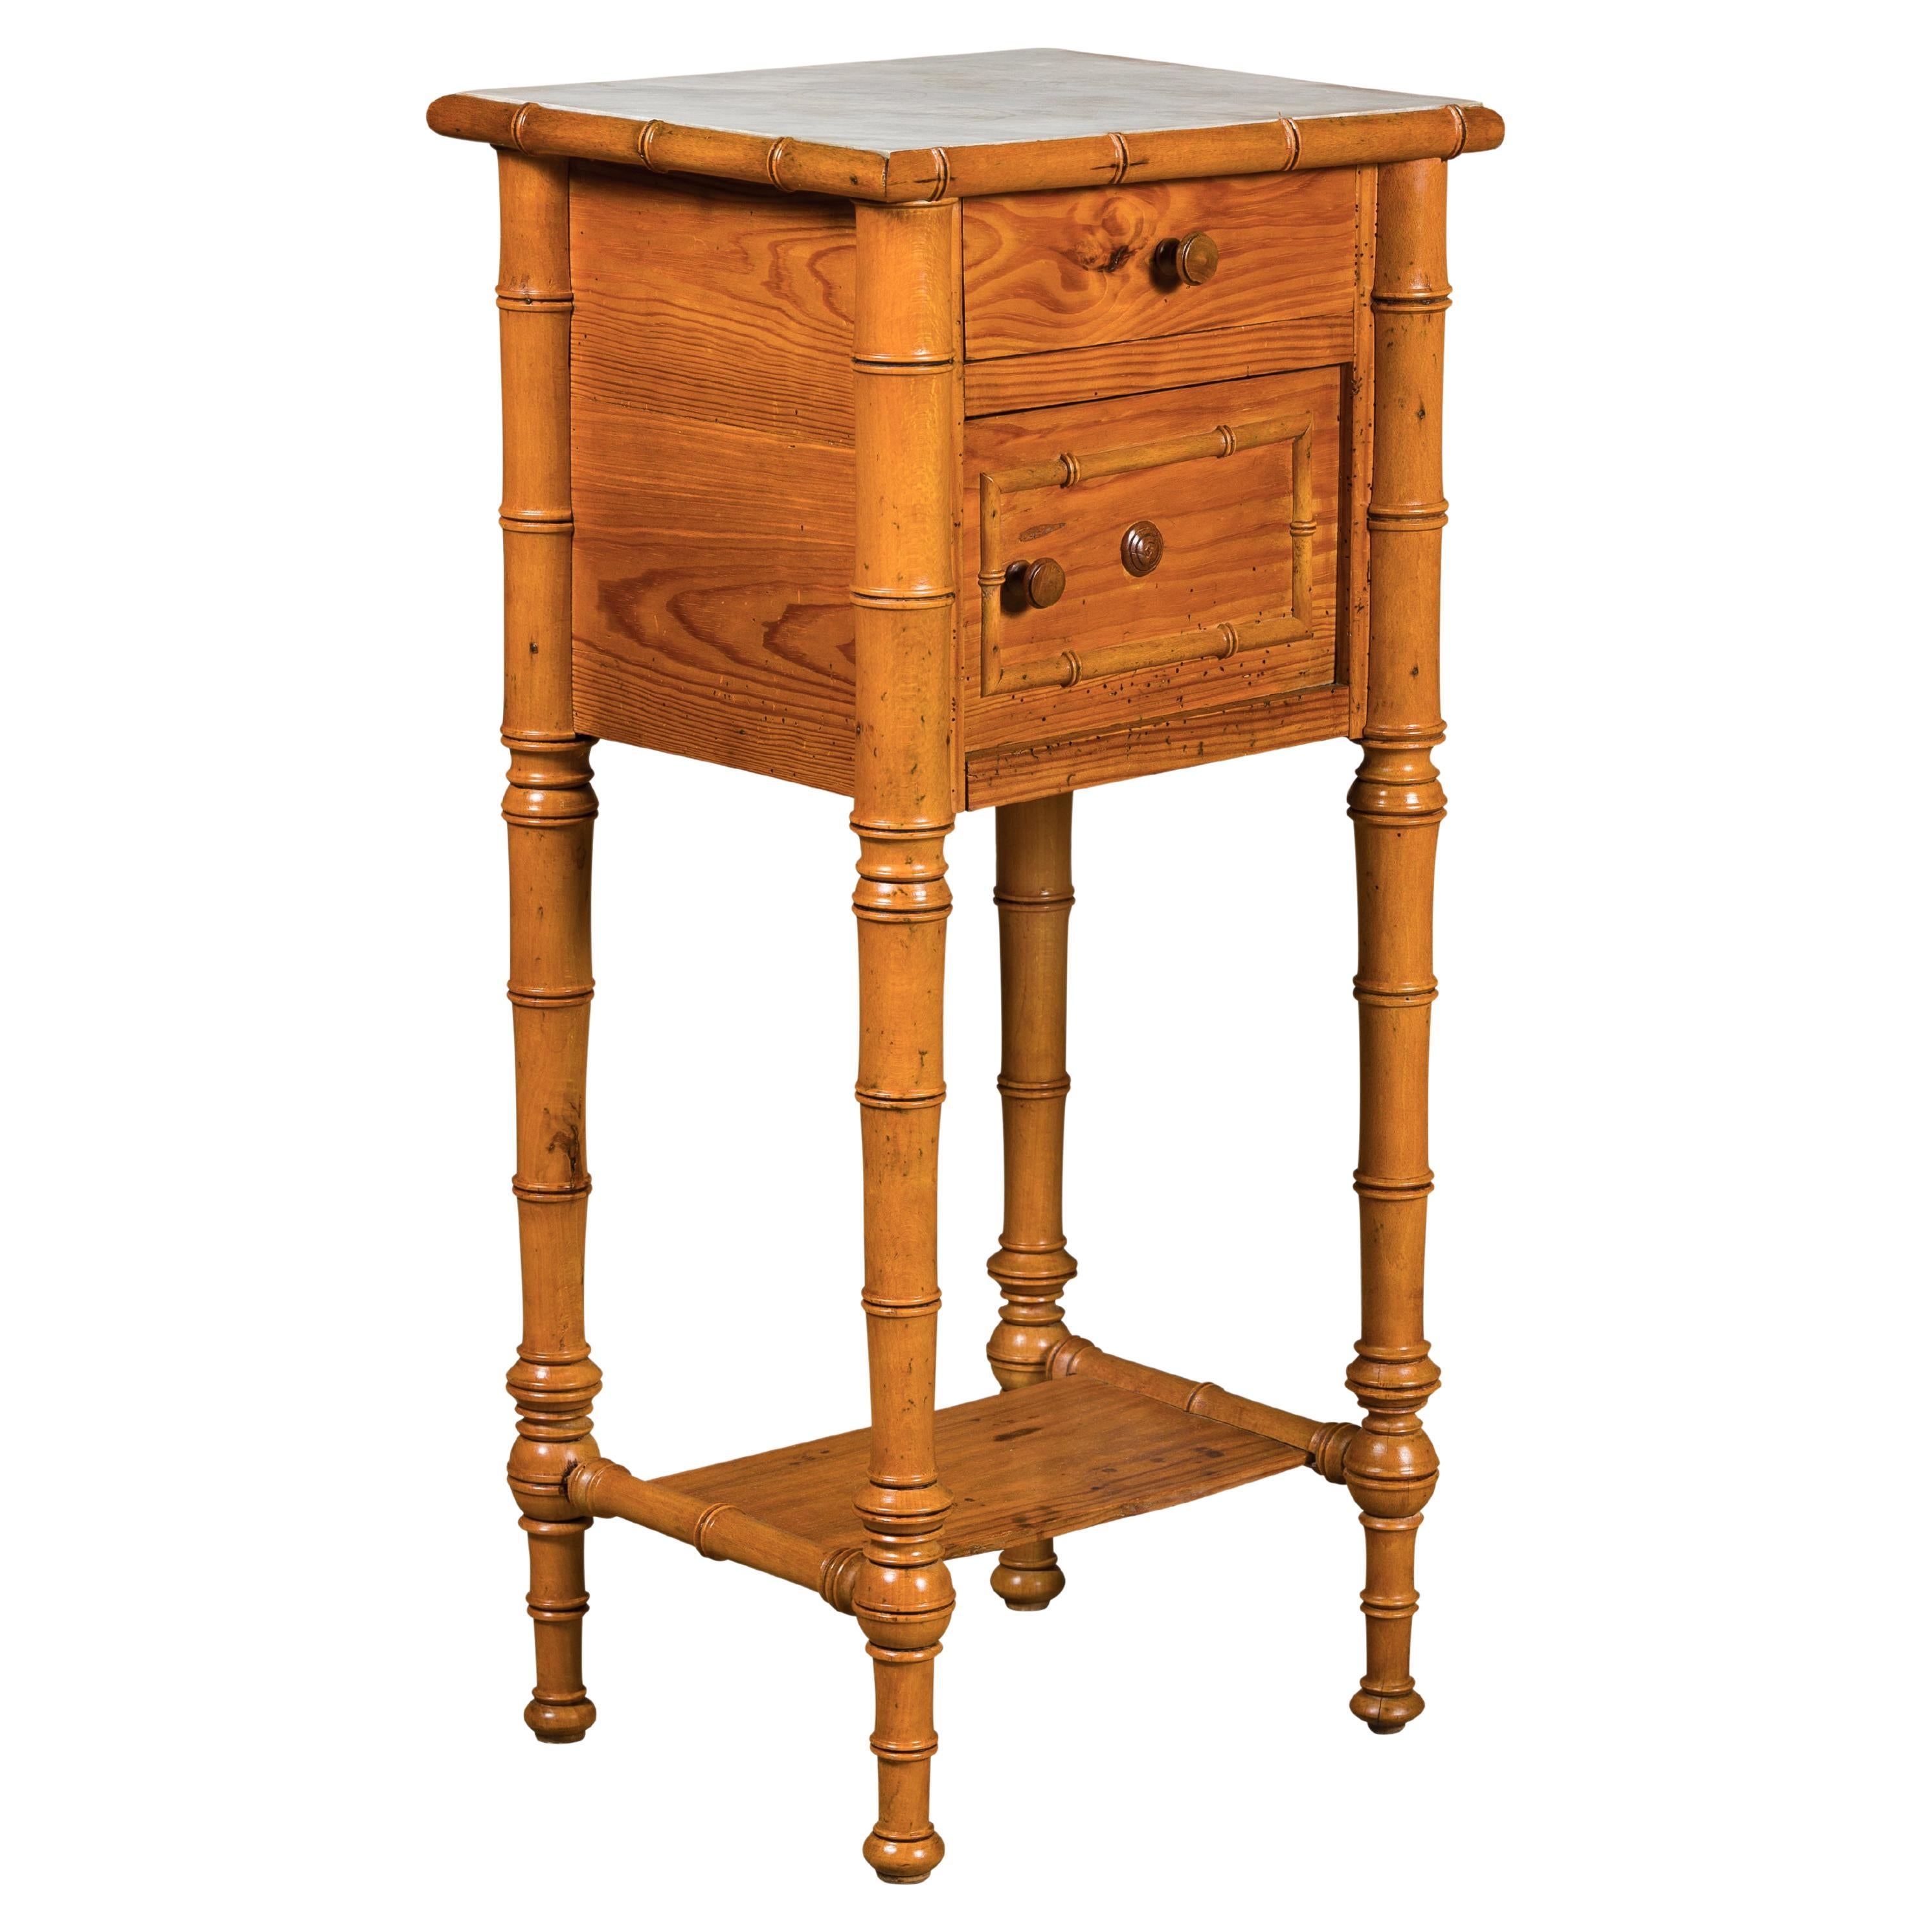 French 19th Century Pine Faux Bamboo Side Table with Marble Top, Door and Drawer